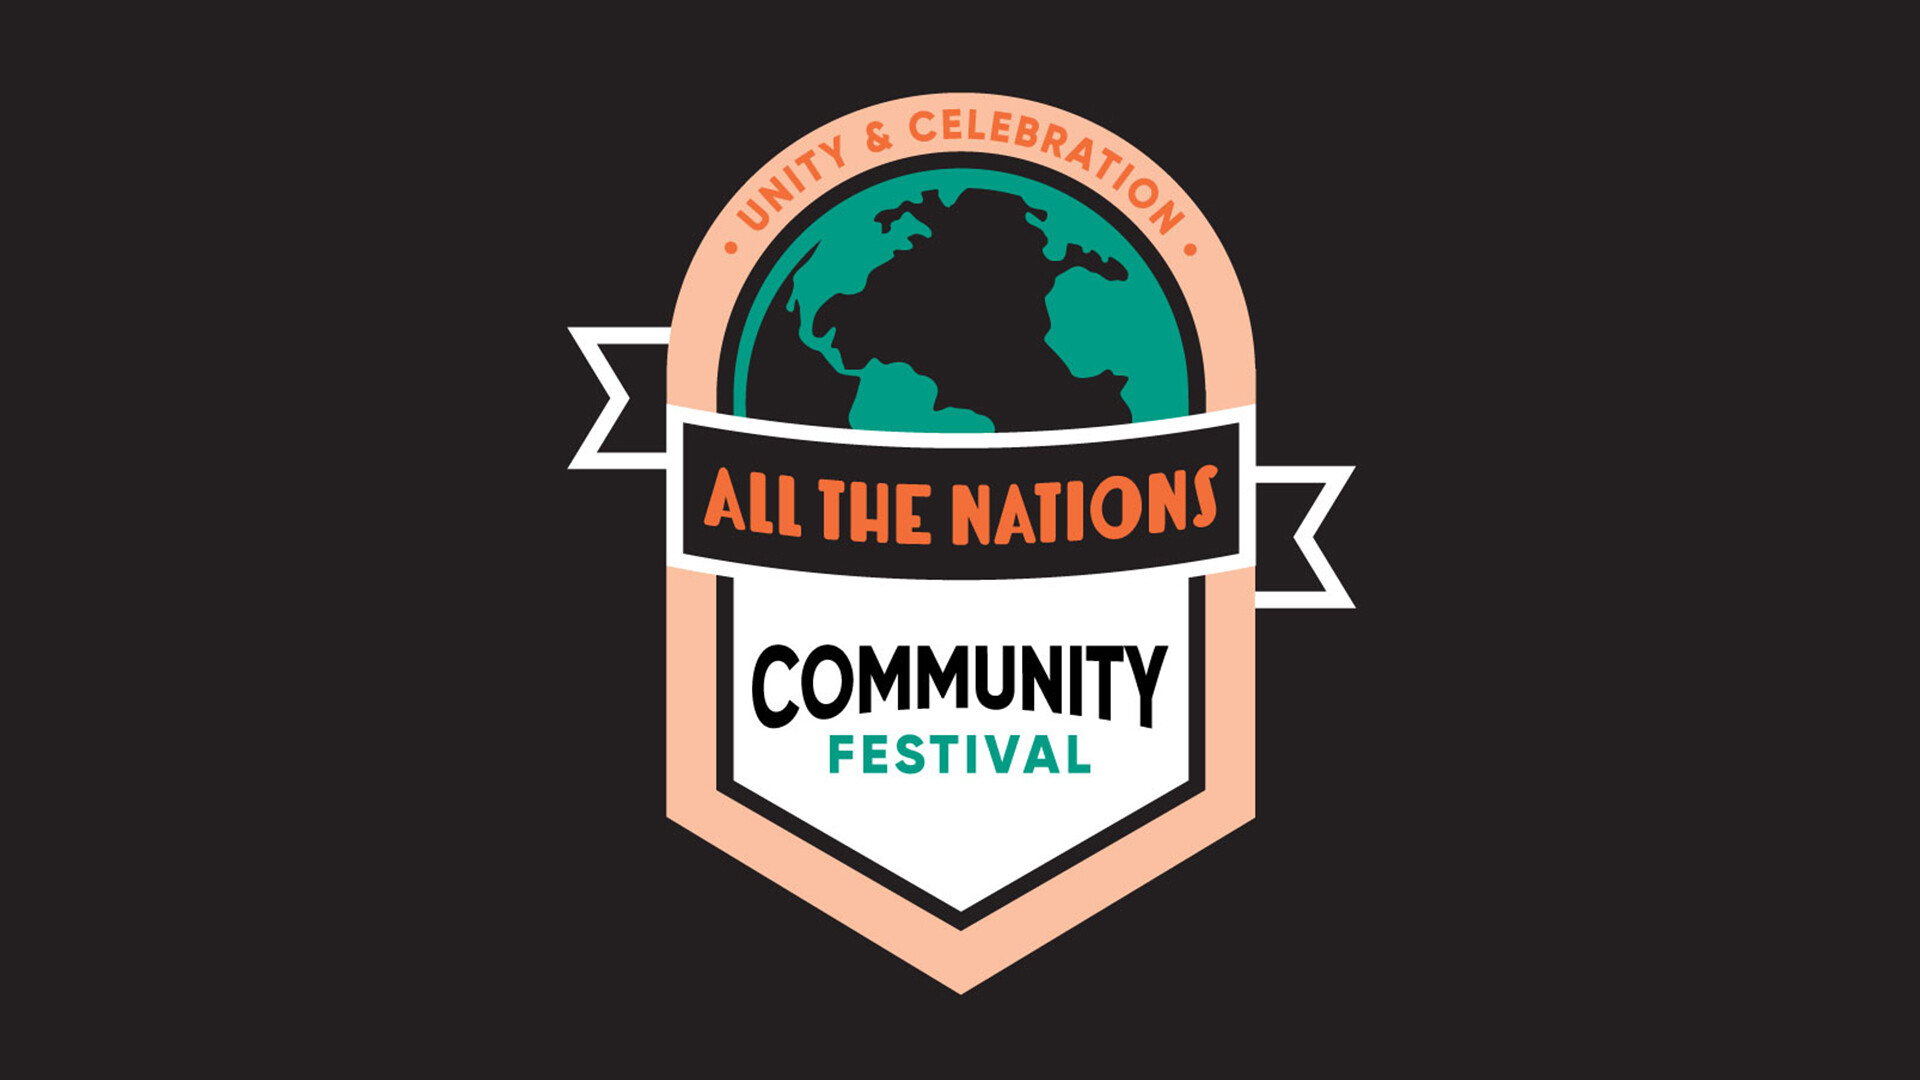 All the Nations Community Festival